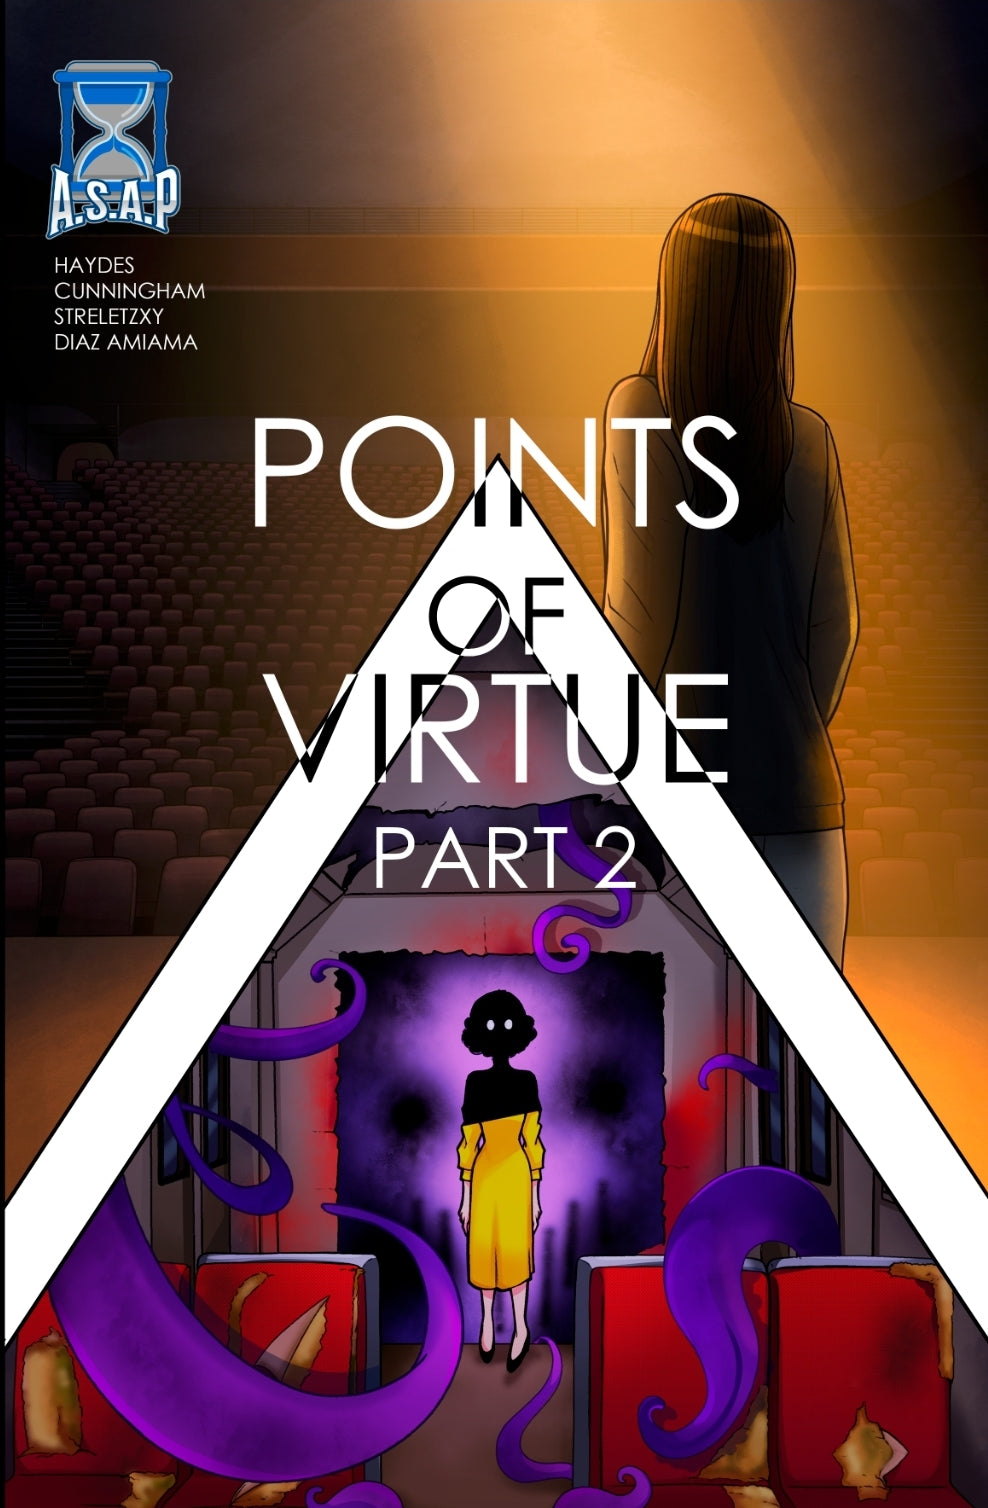 PREORDER NOW - Points of Virtue Part 2